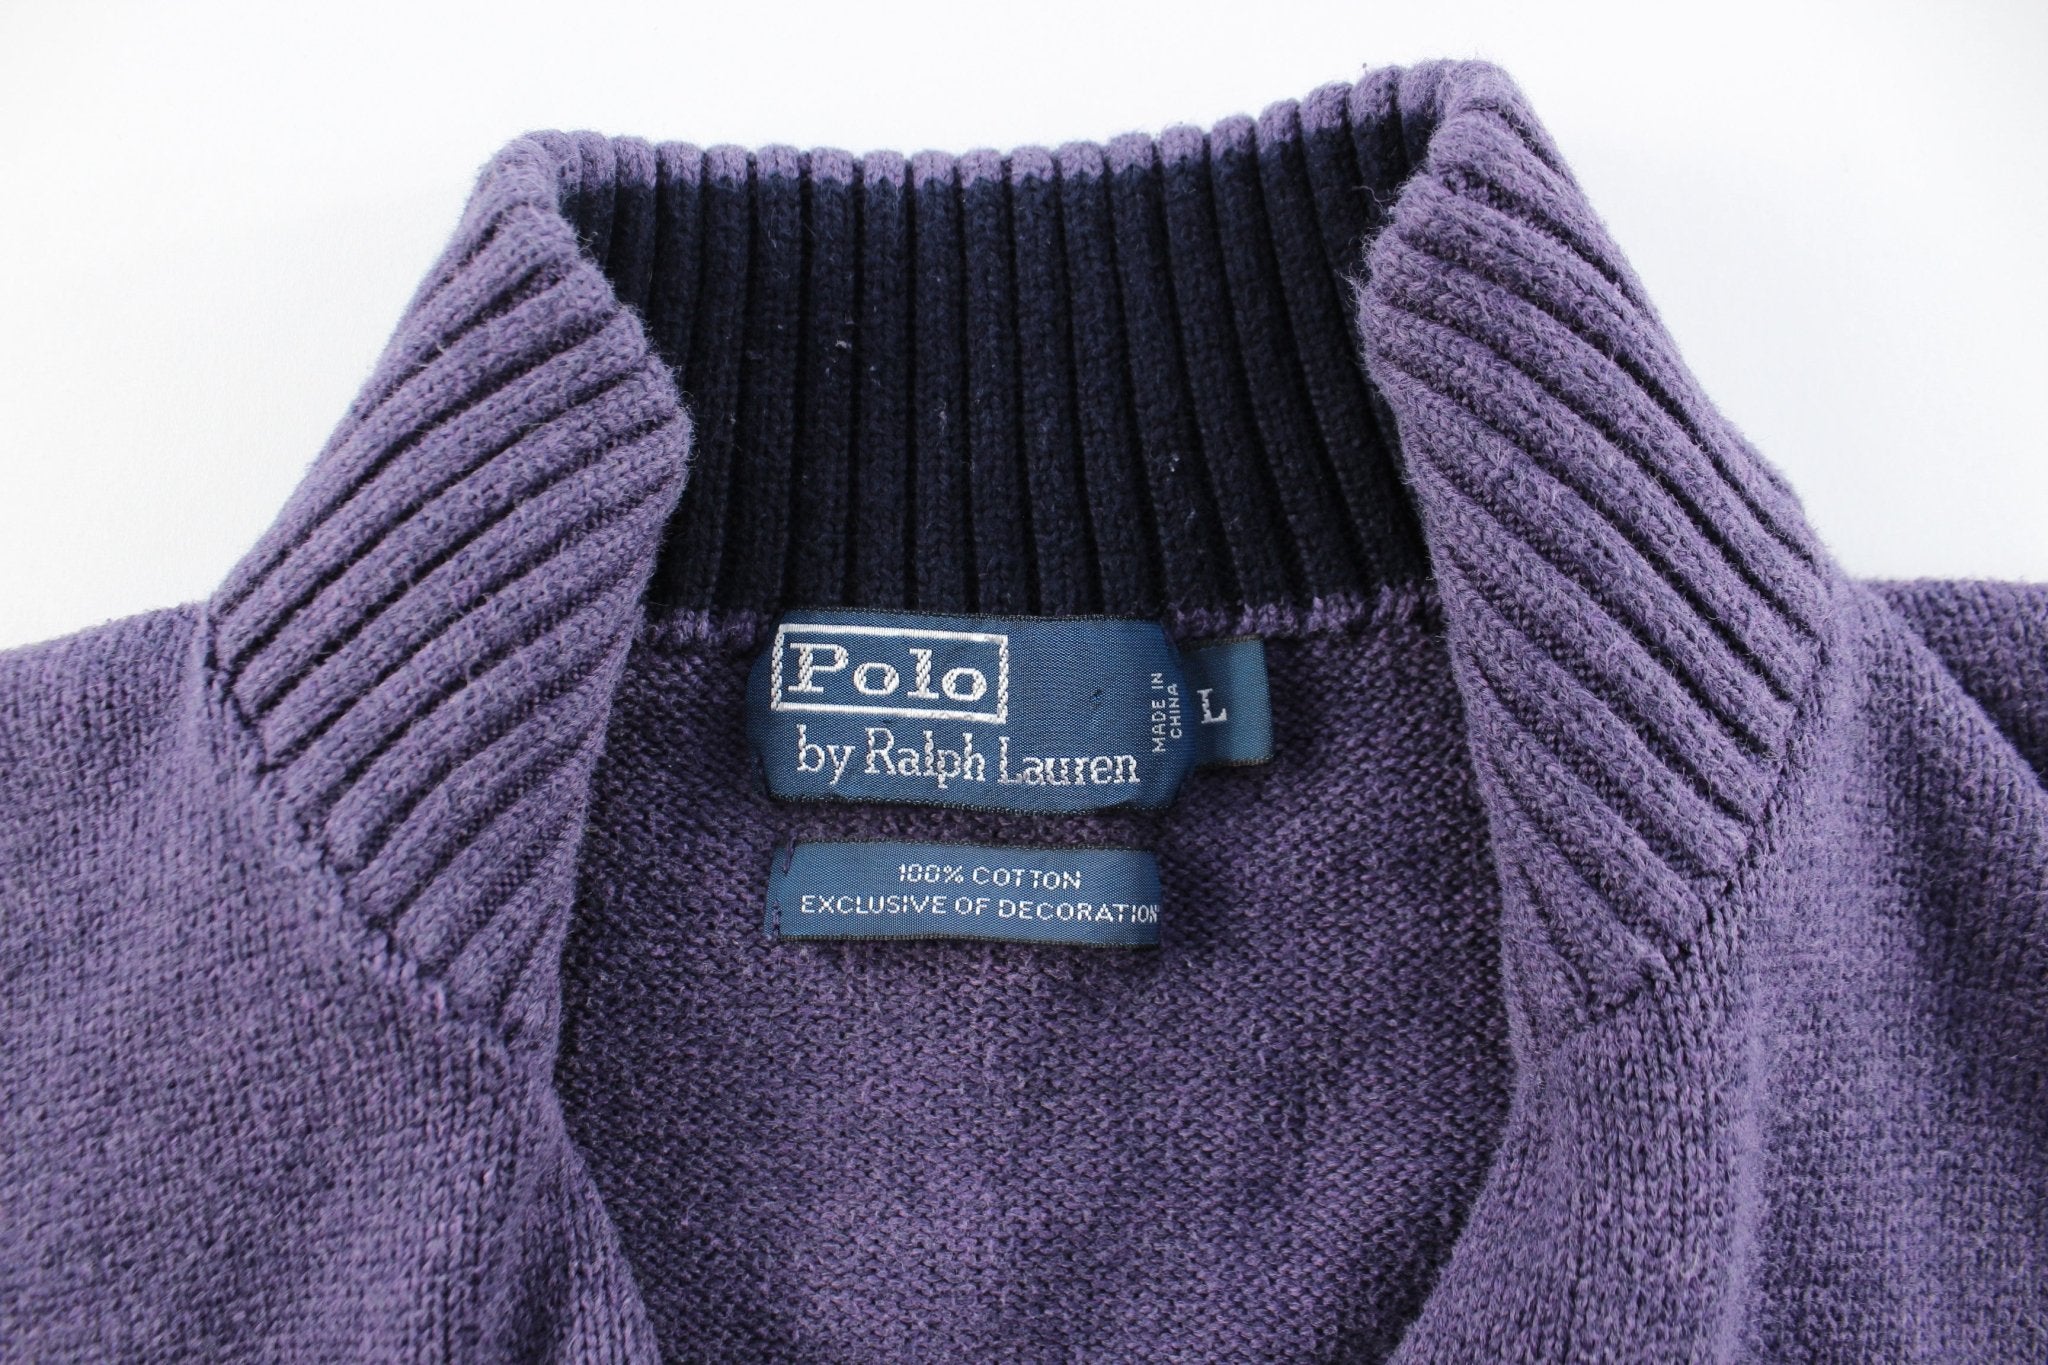 Polo by Ralph Lauren Embroidered Logo Purple Sweater - ThriftedThreads.com